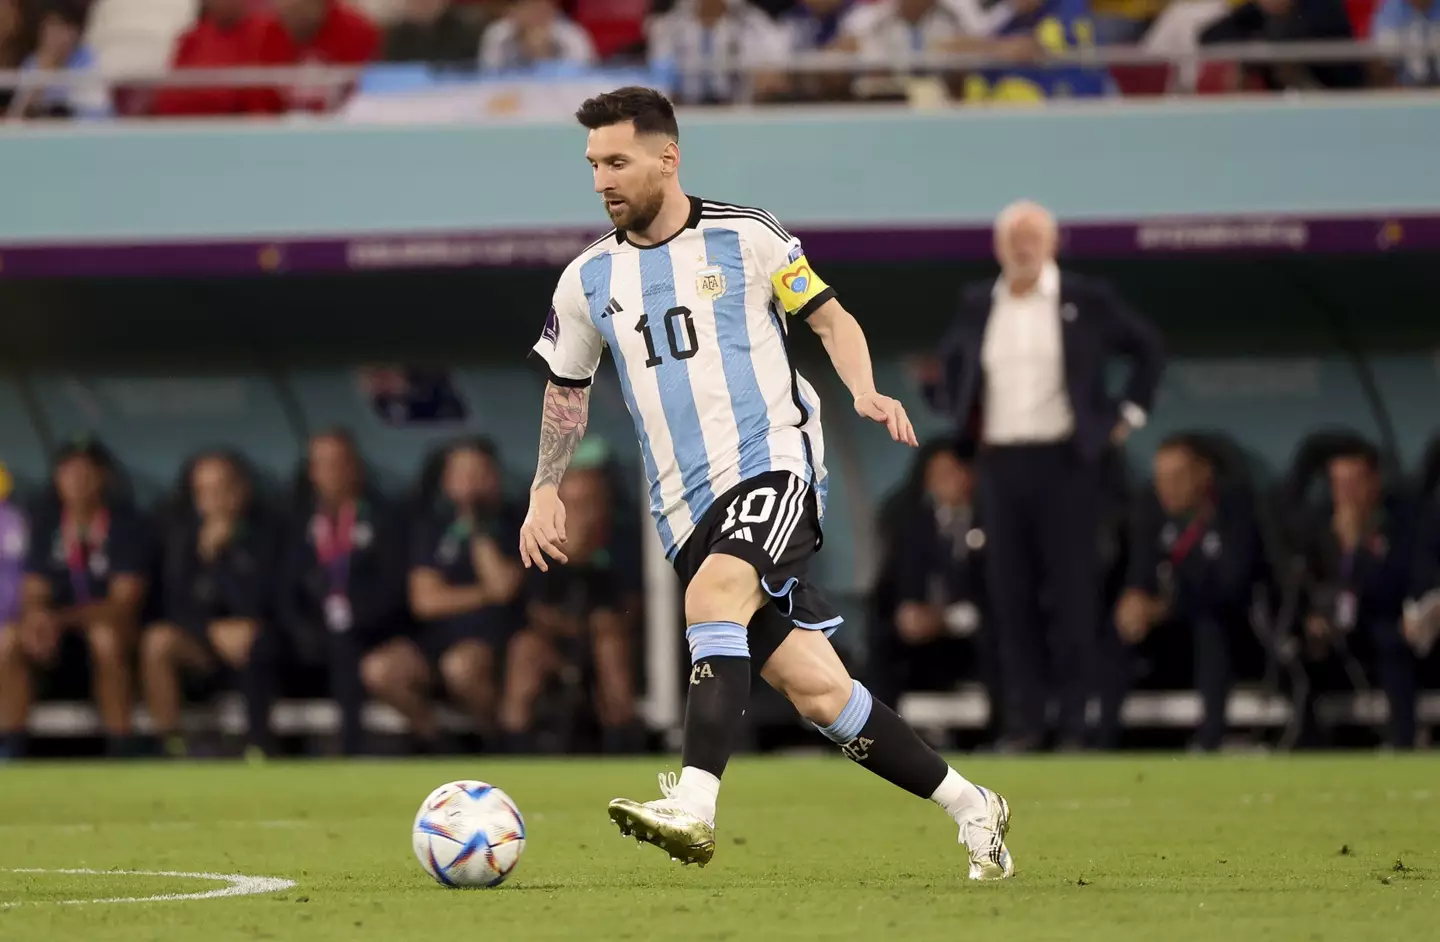 Argentina captain Lionel Messi could win his first World Cup medal if his side beat France in the final on Sunday.